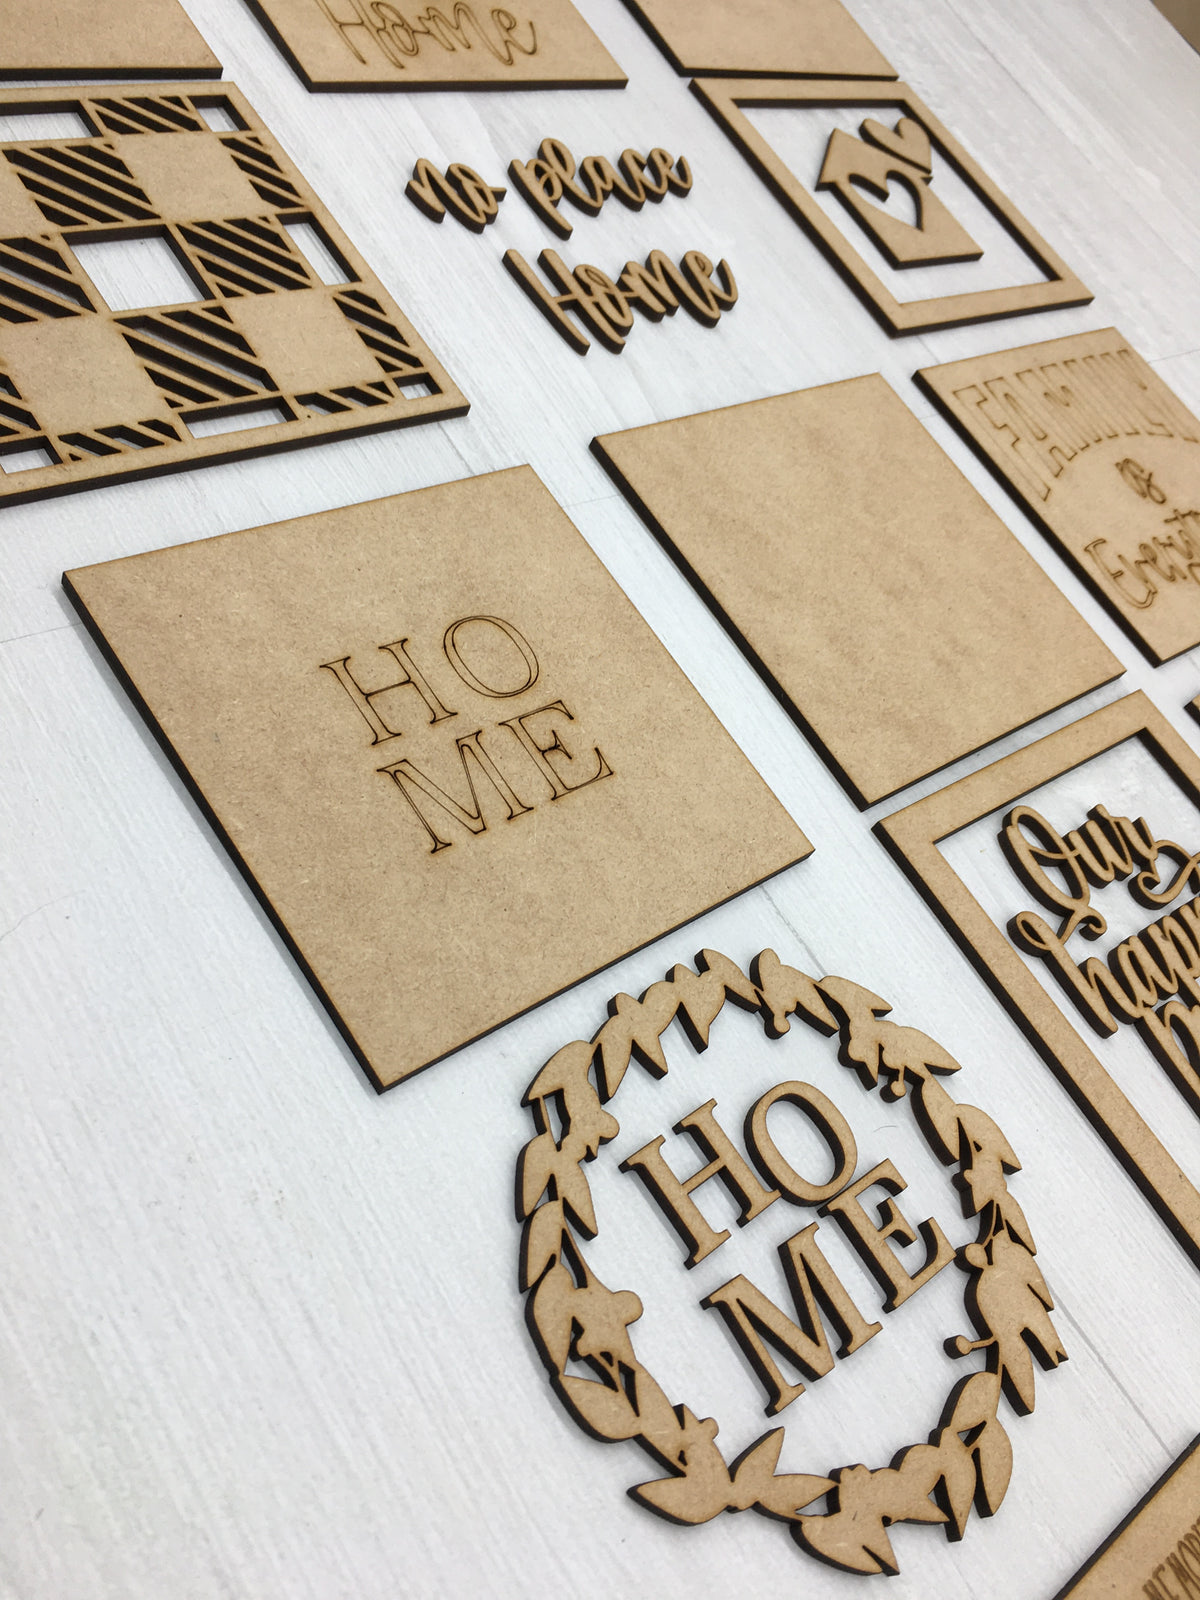 DIY Wooden Interchangeable Mini Signs - Tons of Options!